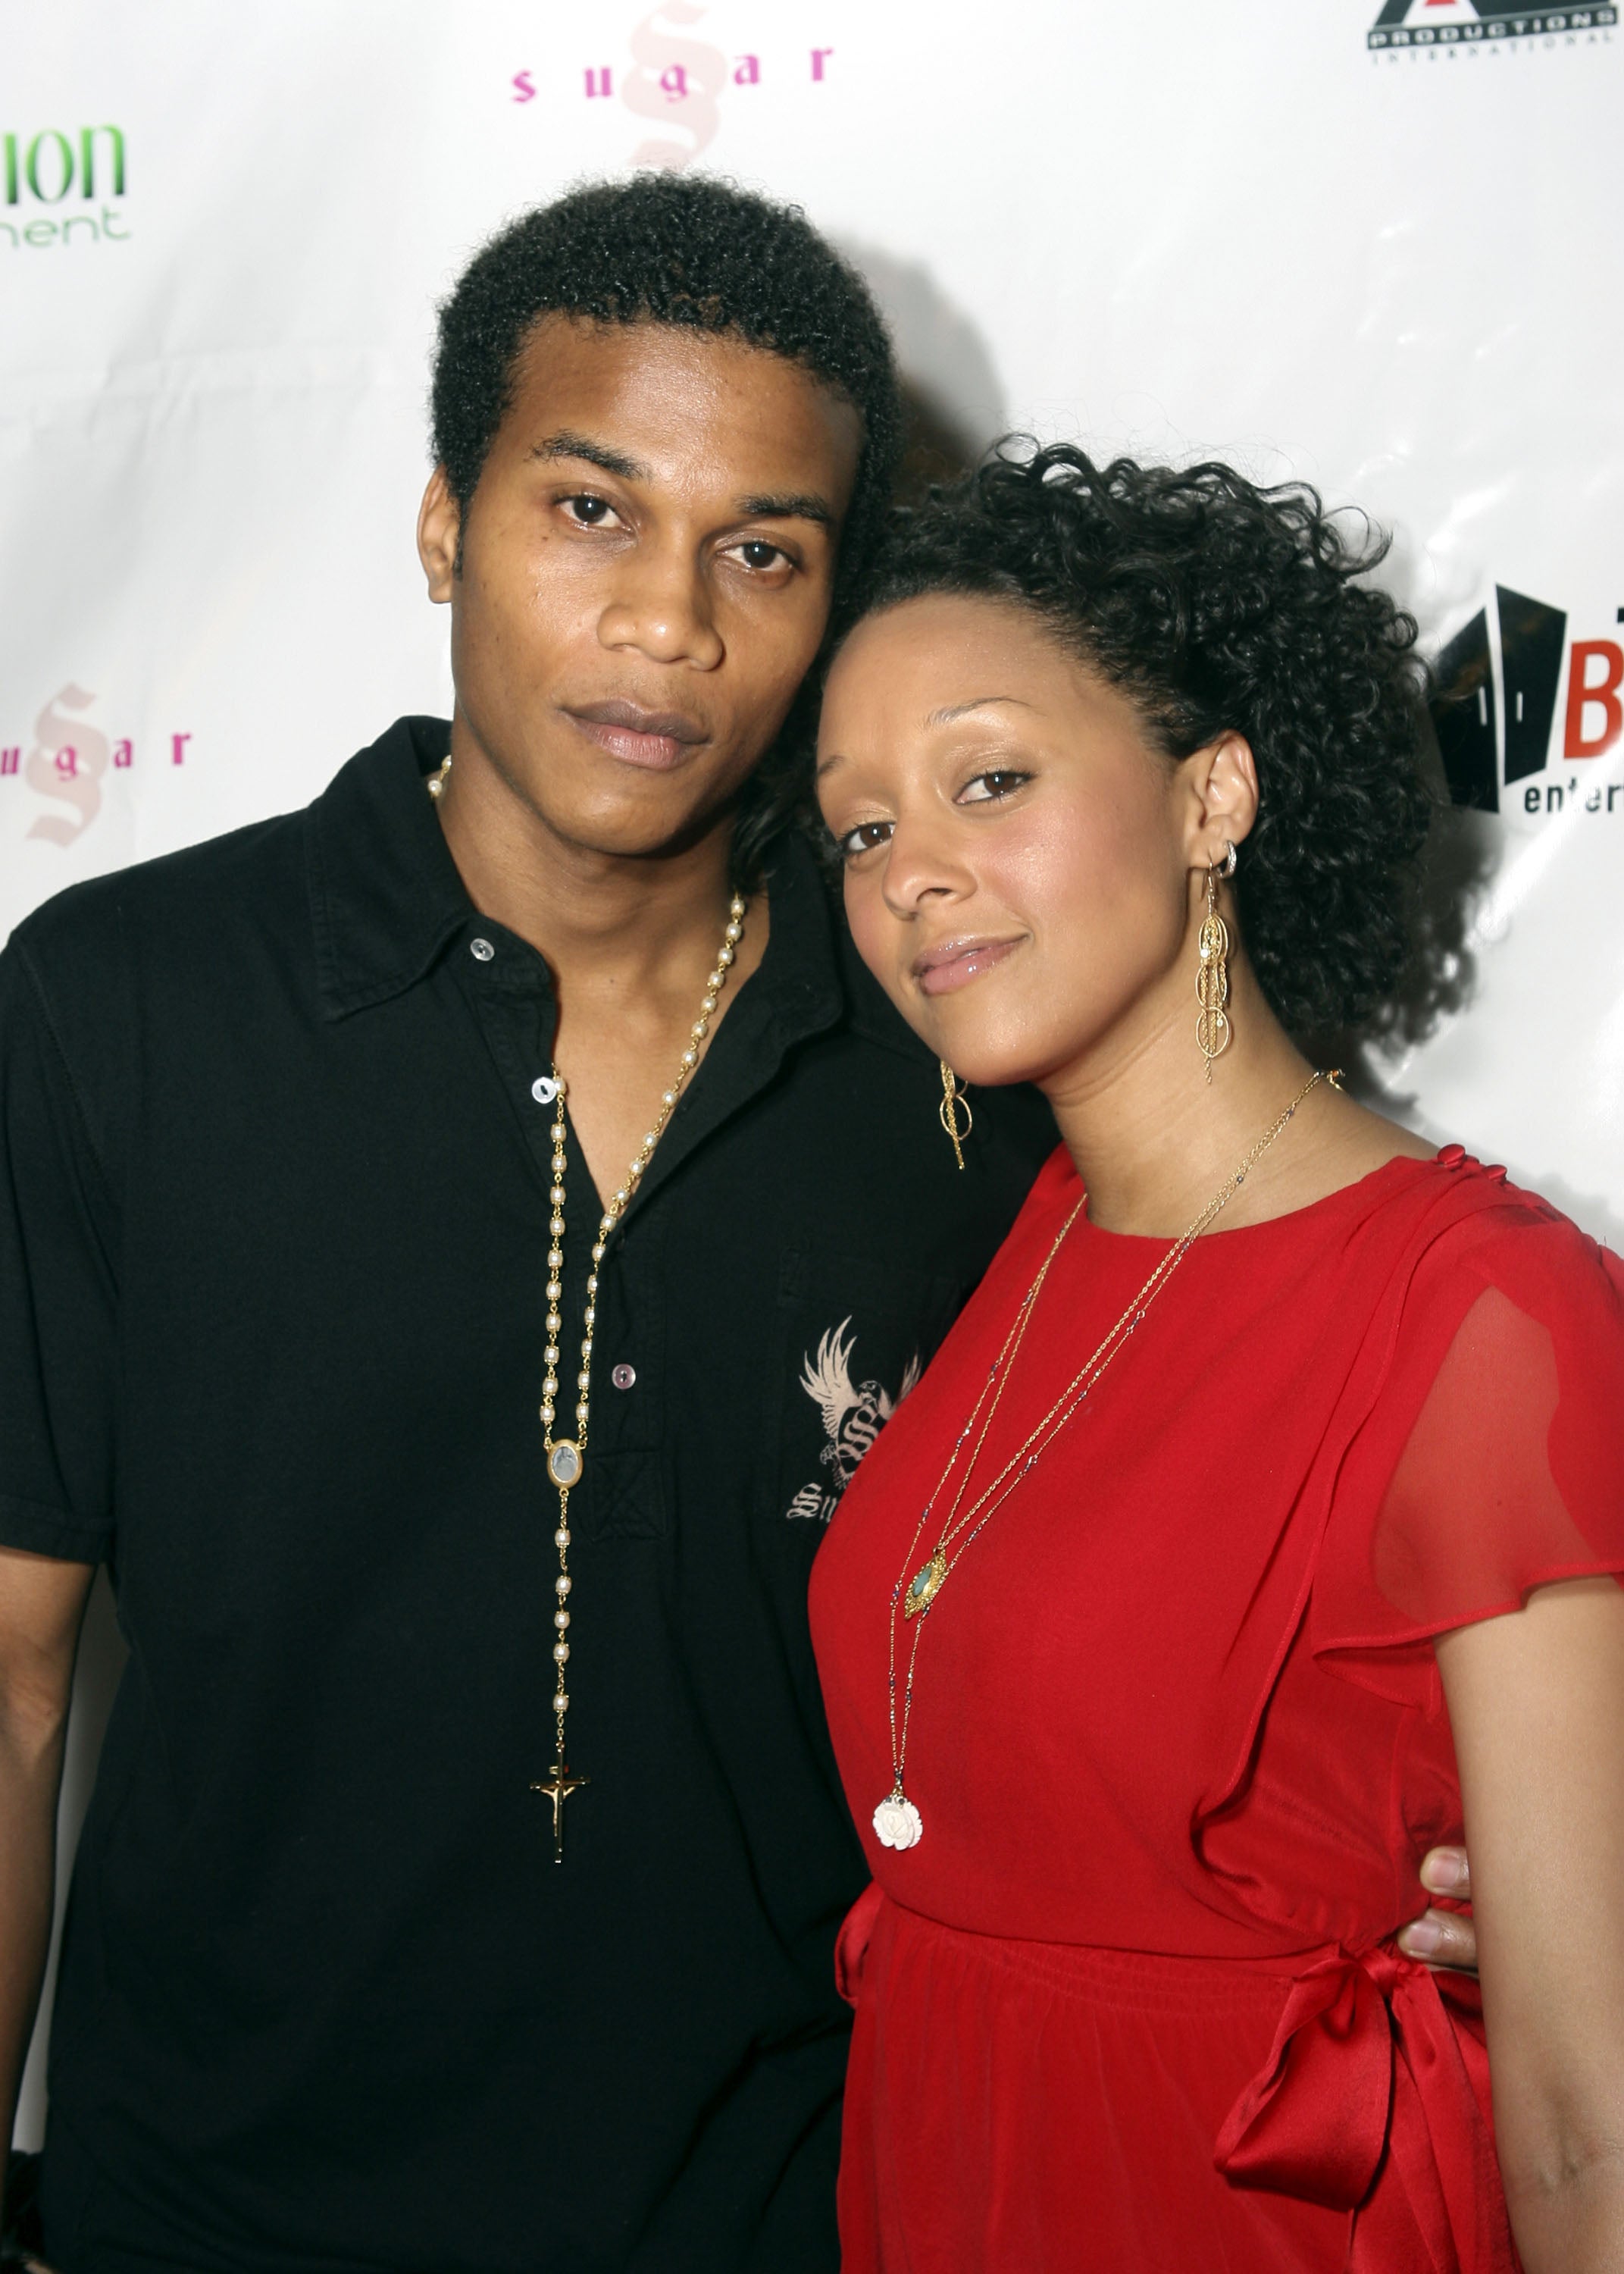 9 Love Lessons We've Learned From Tia Mowry And Cory Hardrict's Sweet Love Over the Years
